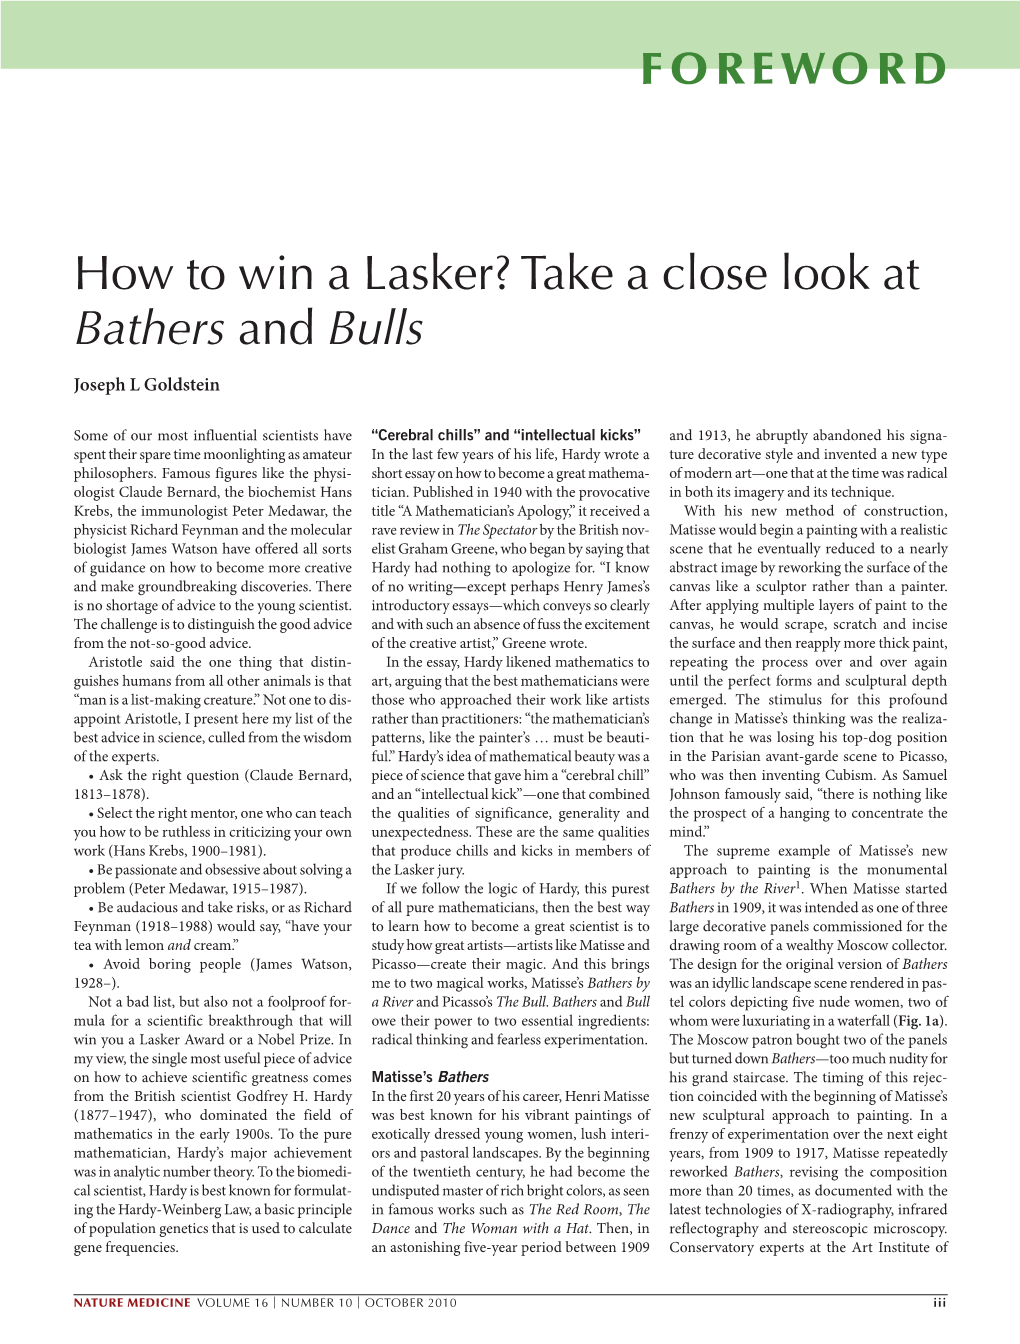 How to Win a Lasker? Take a Close Look at Bathers and Bulls